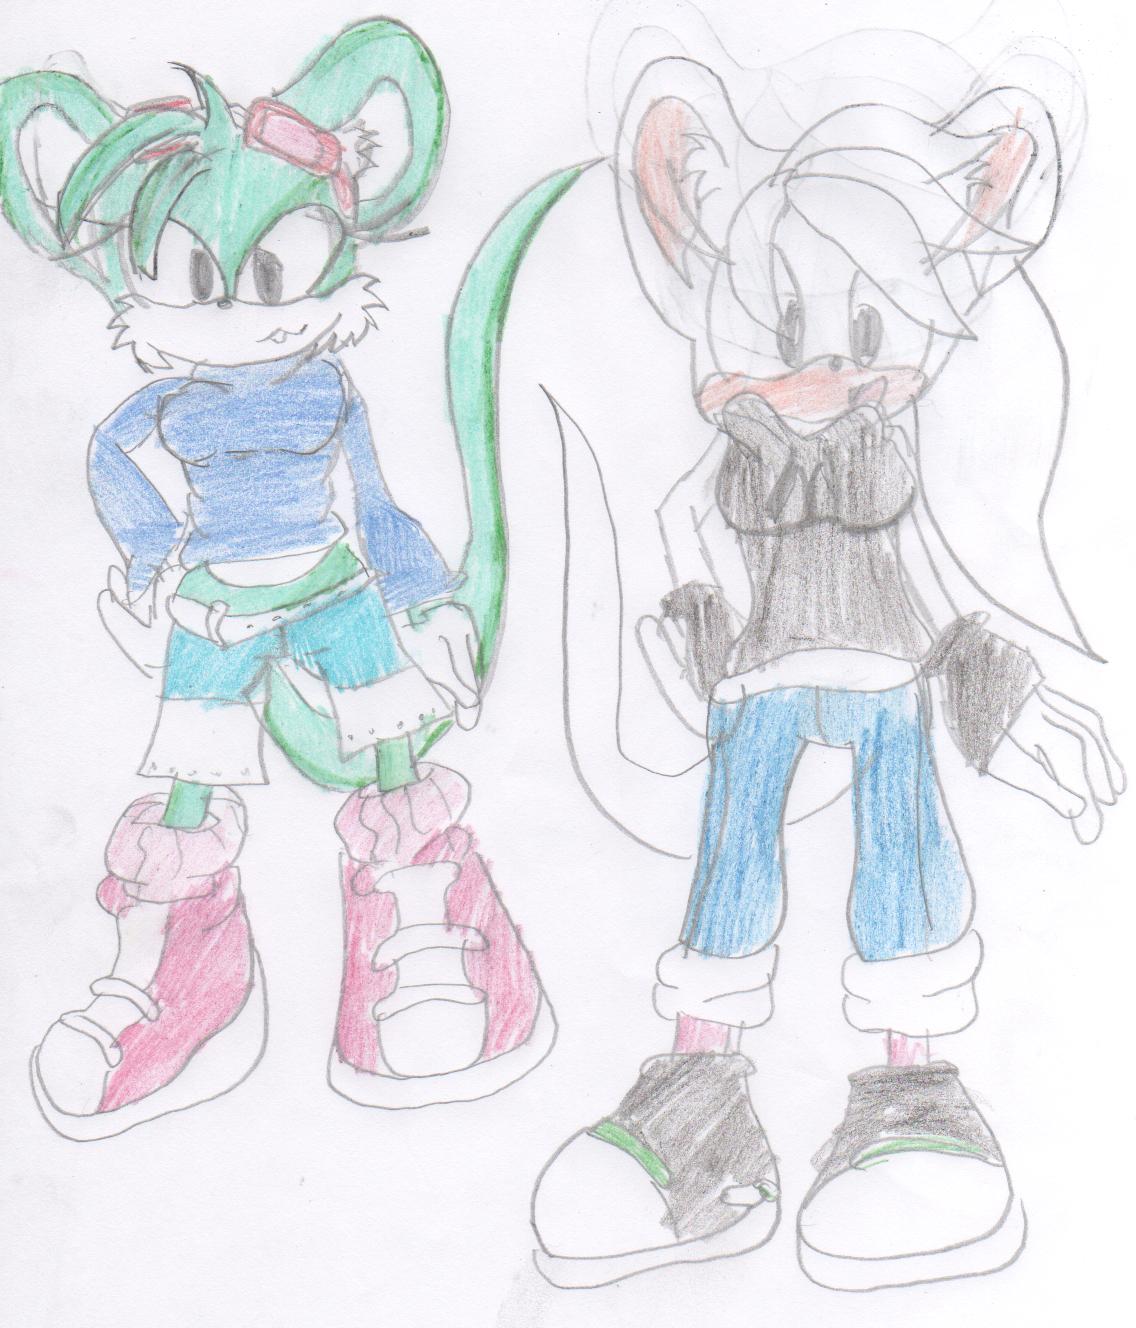 halo and snowflake the mice by jordanthehedgehog